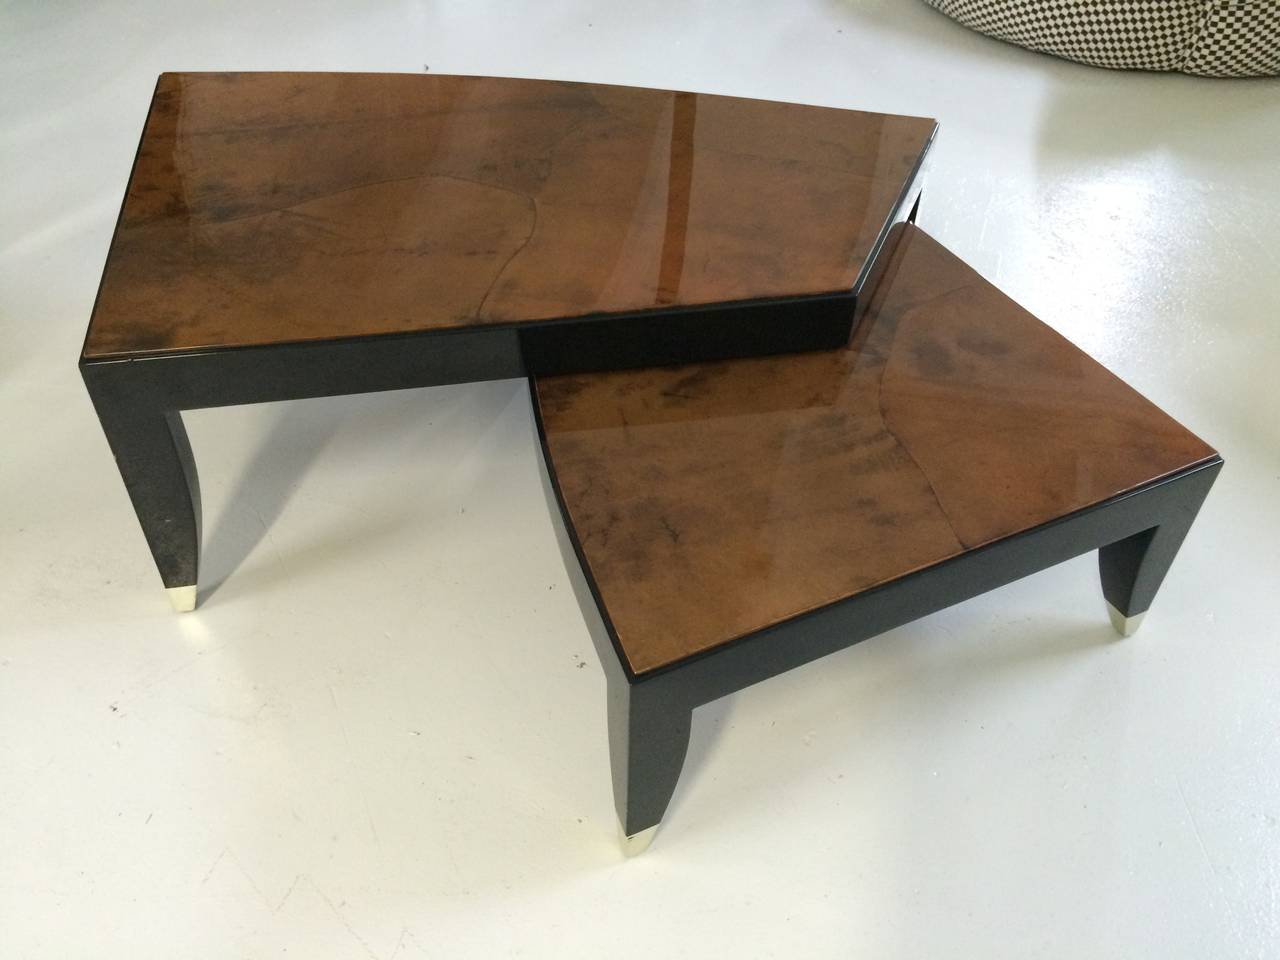 Expanding 2-part lacquered goatskin and black lacquered leg Bristol coffee table with silver leafed feet designed by Karl Springer.

Additional Measurements:
44